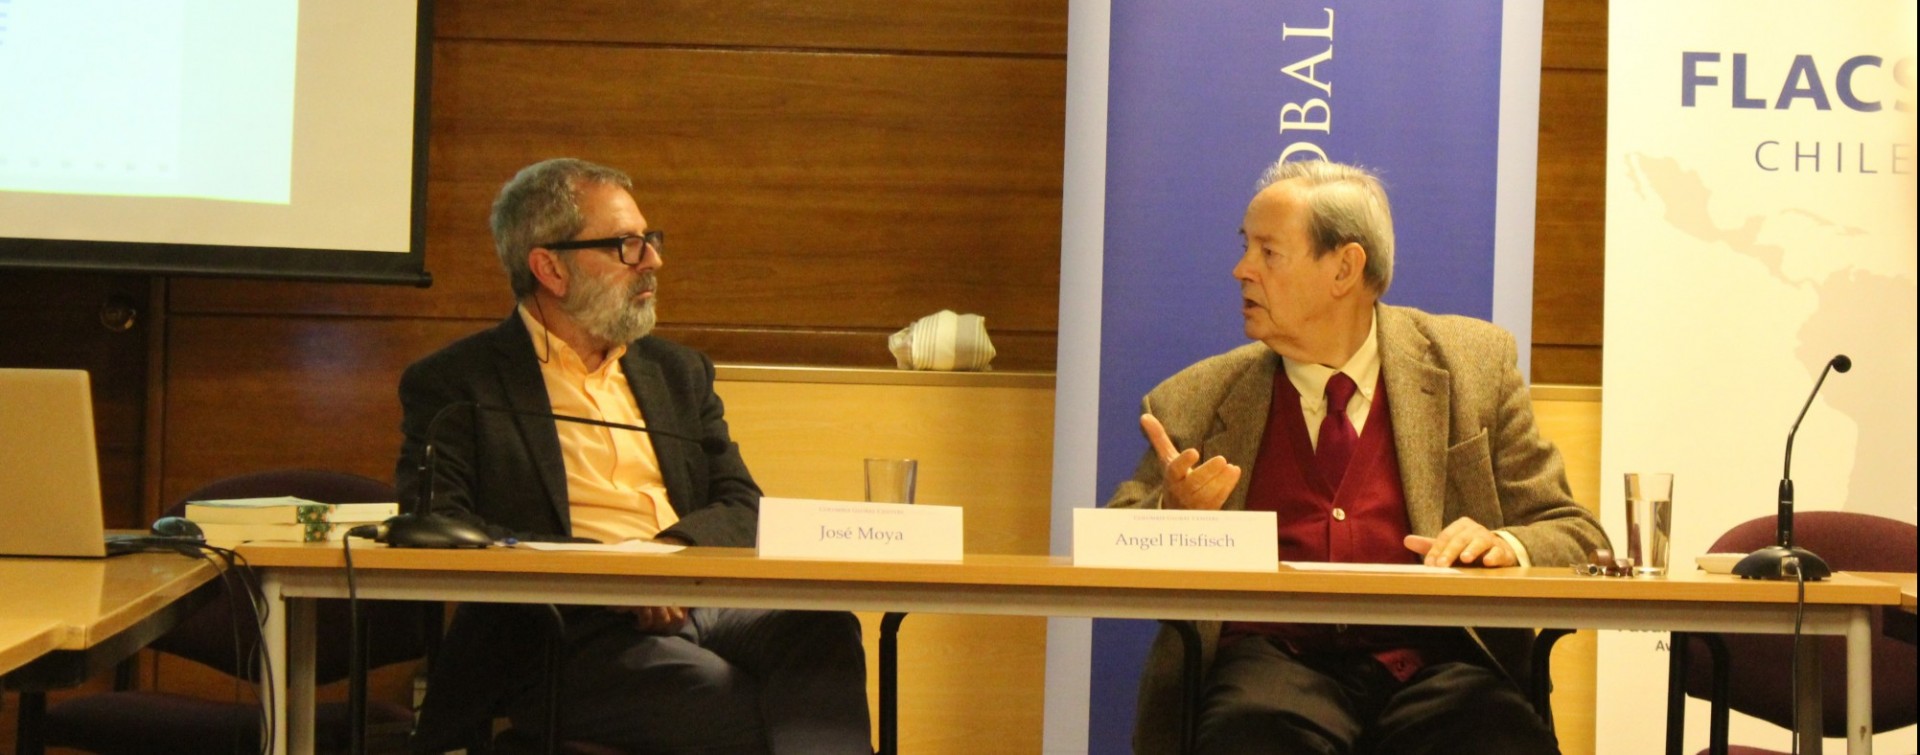 José Moya and Ángel Flishfisch at the Conference.